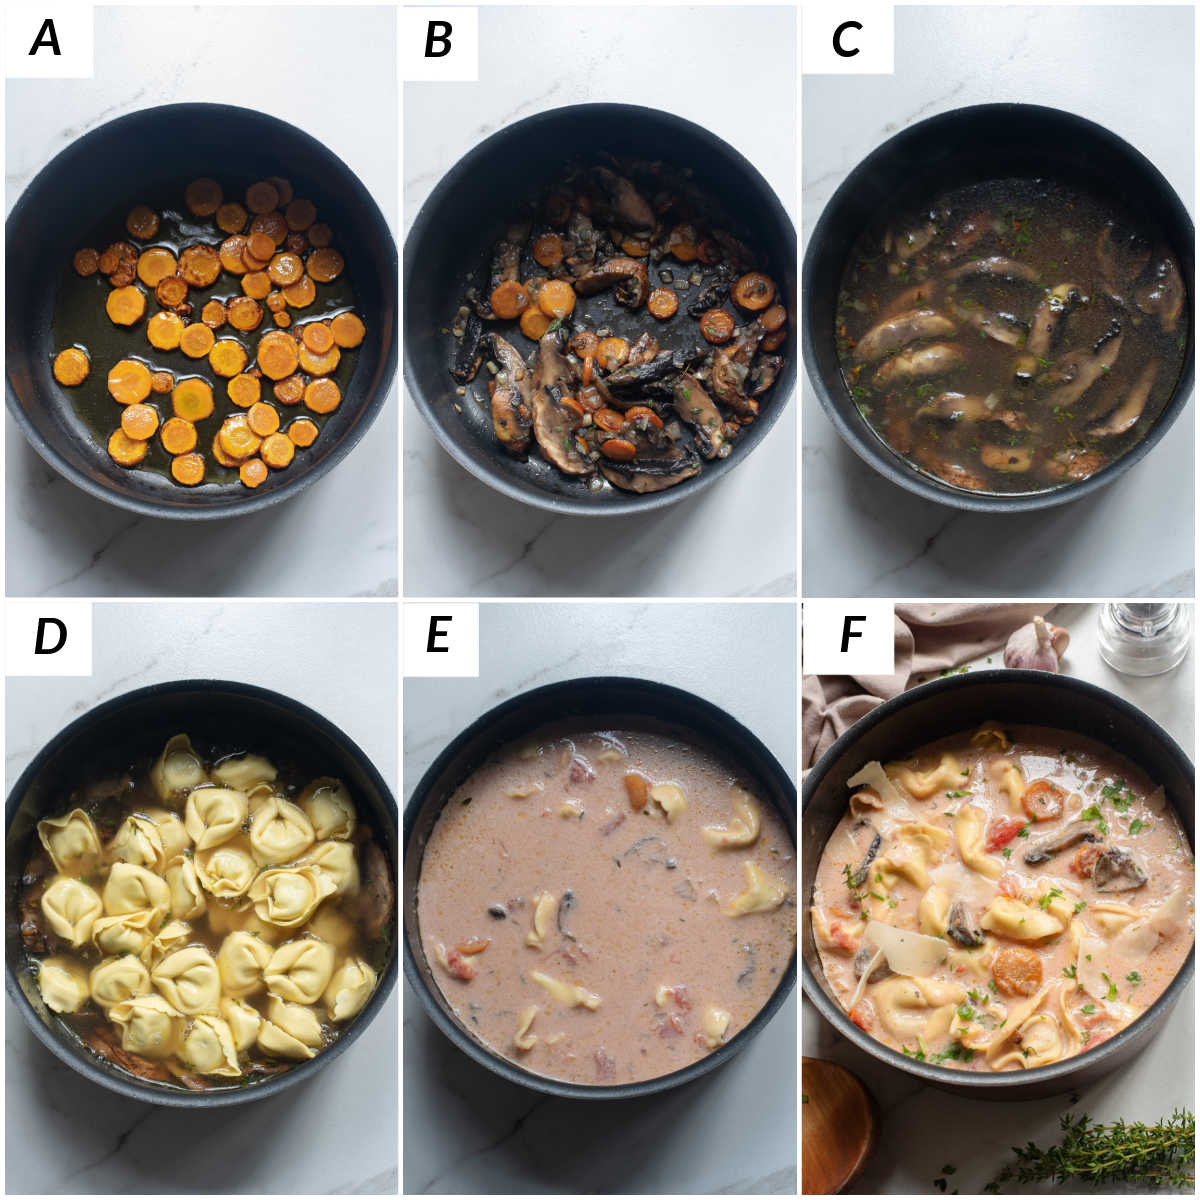 image collage showing the steps for making tomato tortellini soup